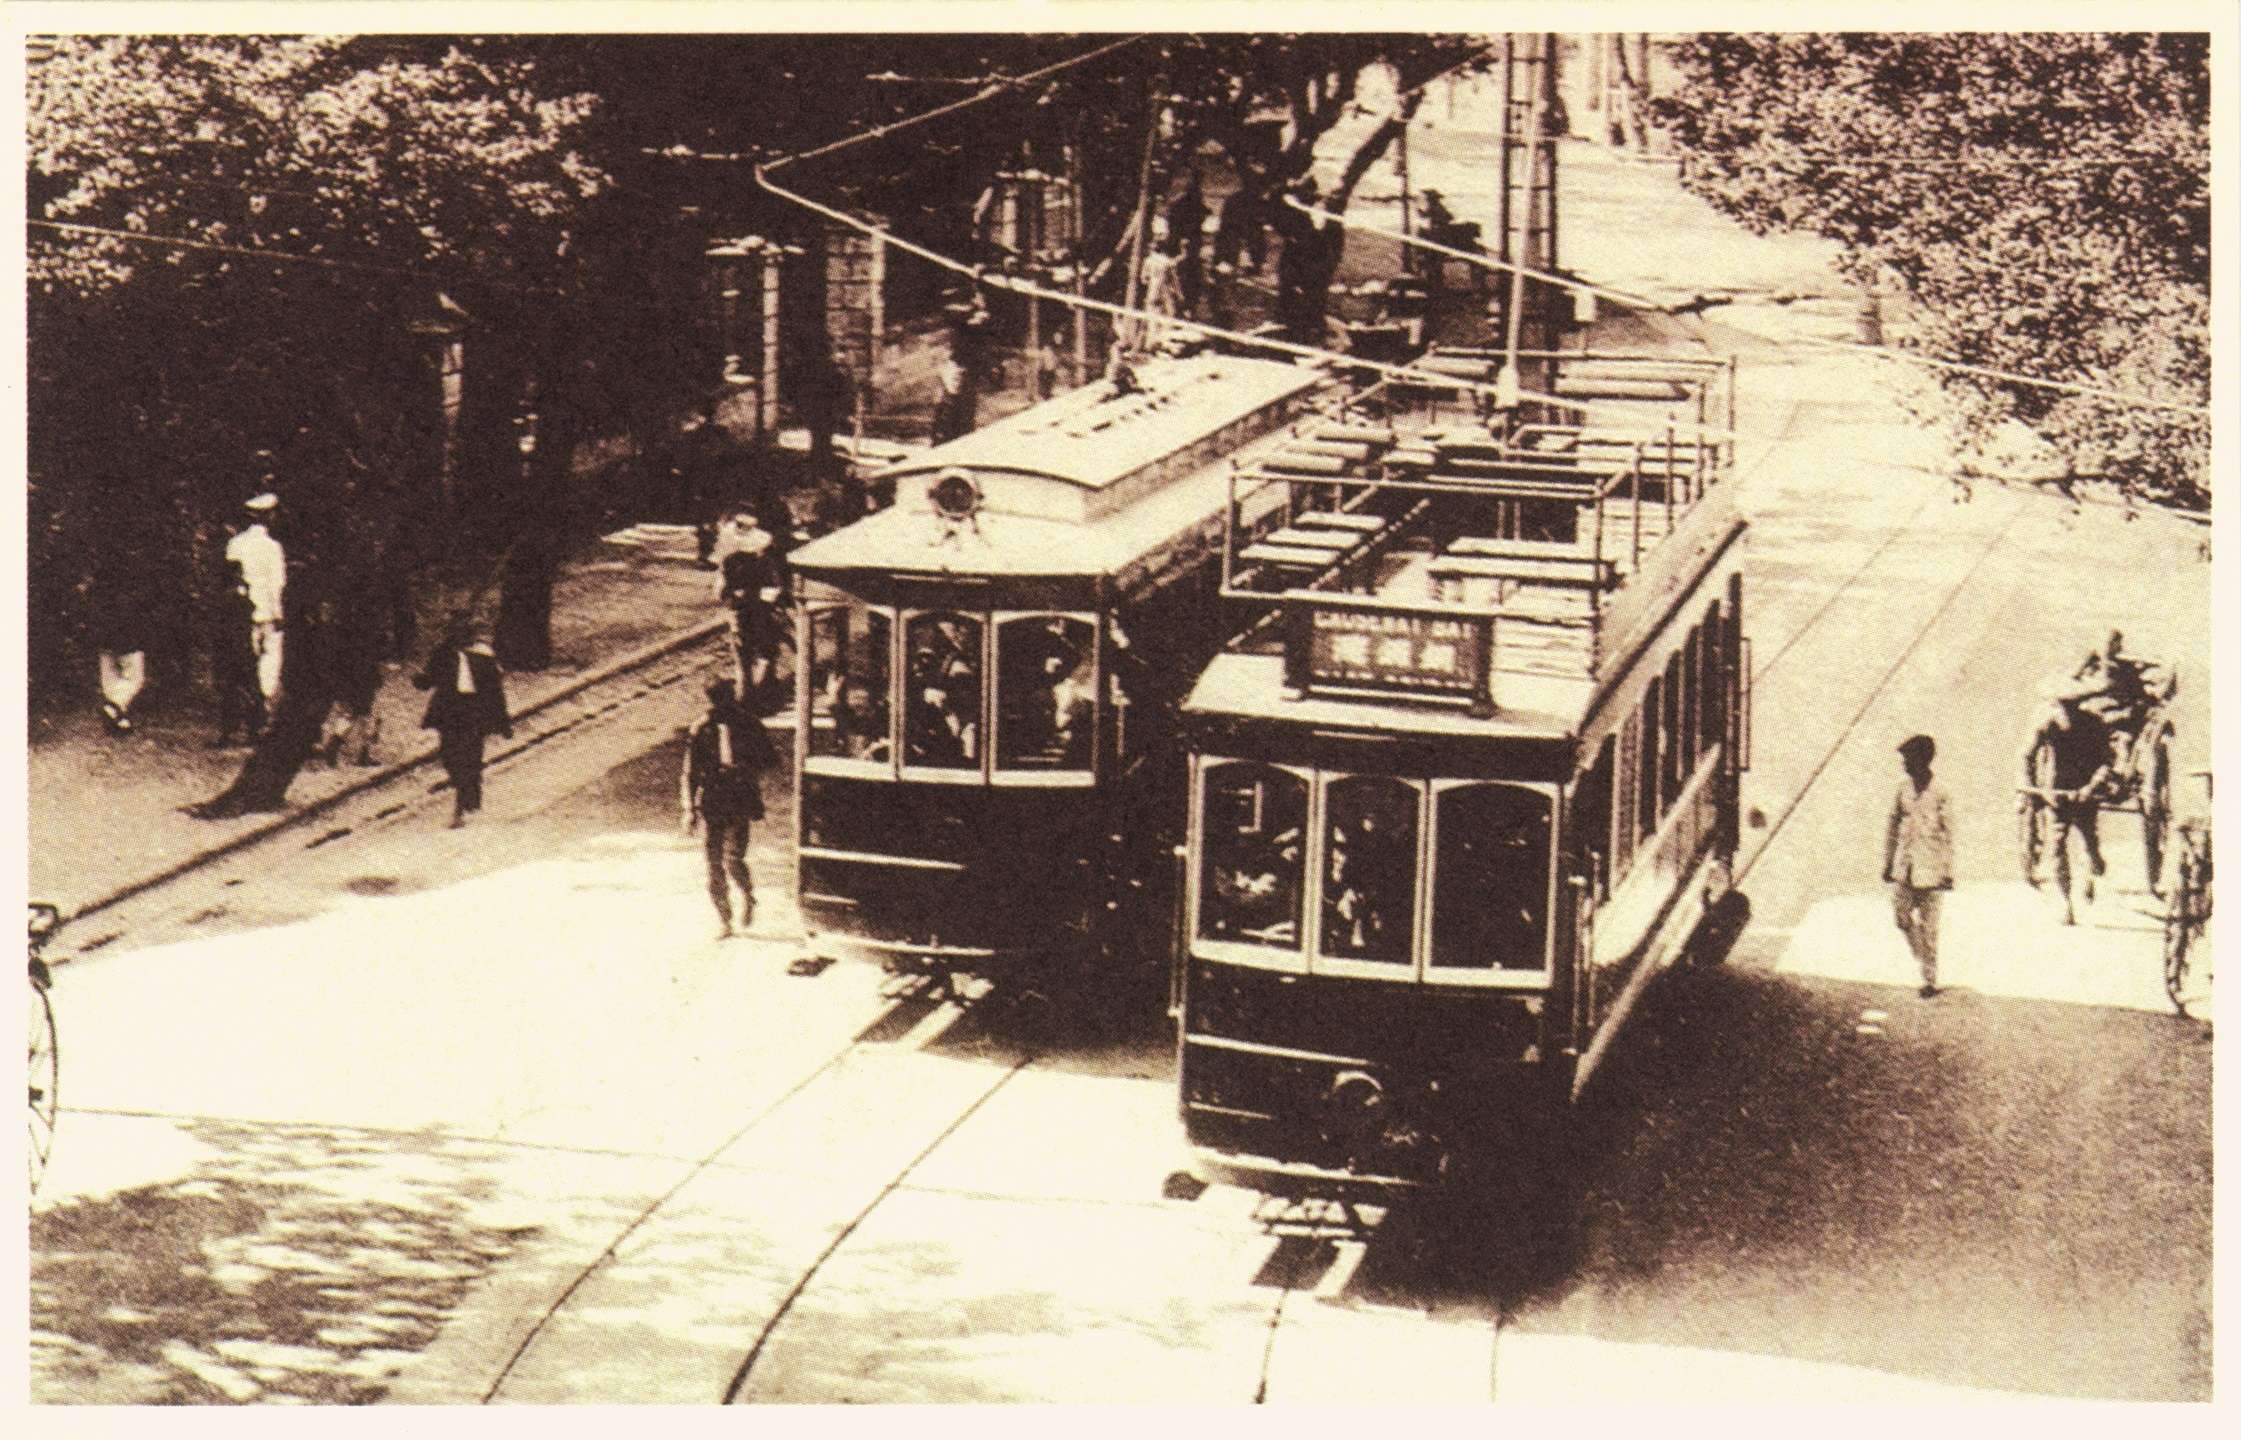 When we were ugly: South China Morning Post took a sarcastic tone in 1903 reports about the city’s first trams